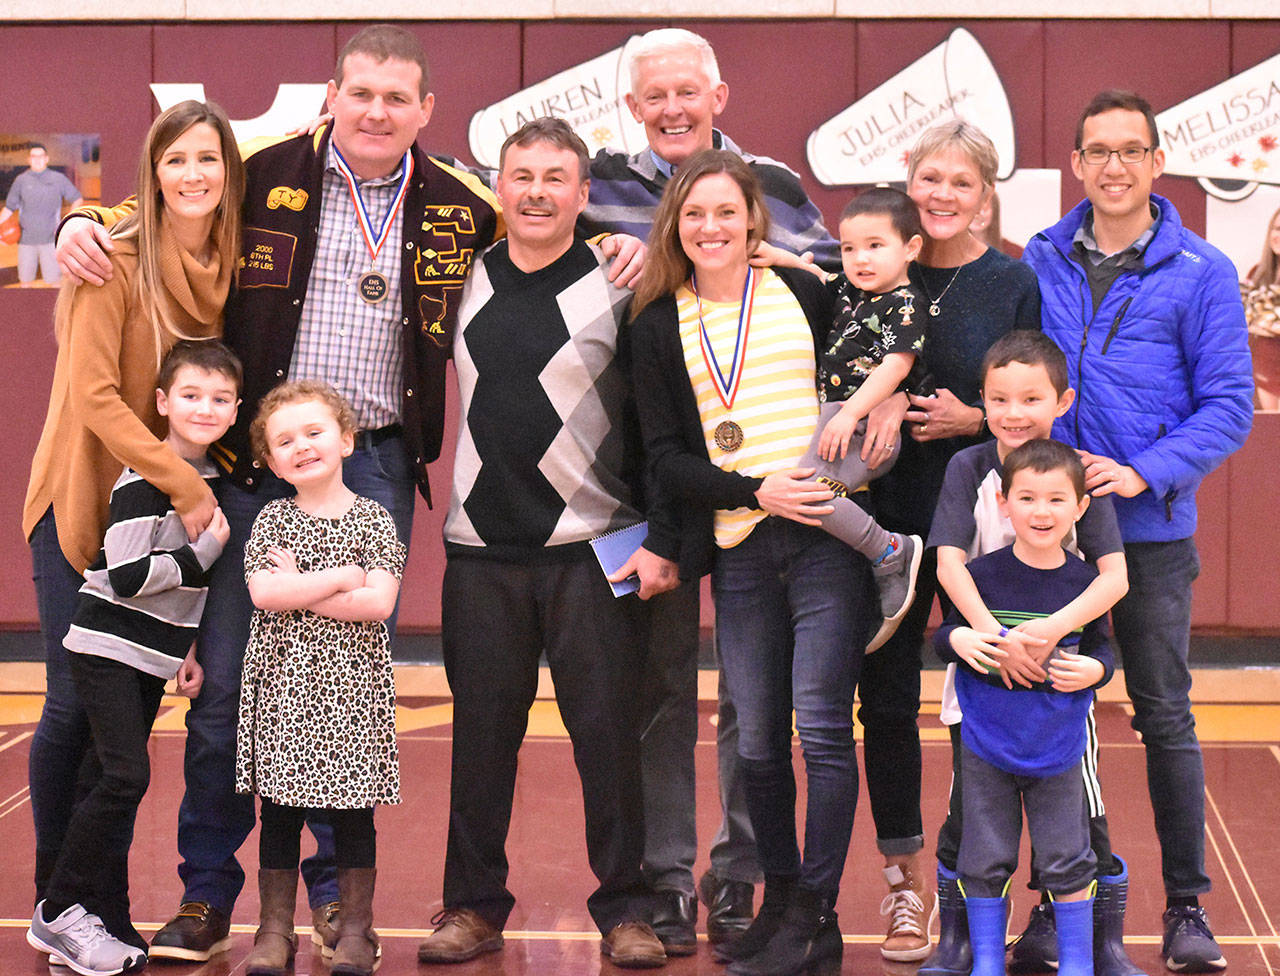 Gathering for a group photo Friday were Ty Watterson, his wife Megan, kids Sam and Macy, and his EHS coach Lee Reichert. Joining Alison Tubbs Mandi were her husband Mark, children Nathan, Tyler and Zach, and her parents Tim and Nancy. Photo by Kevin Hanson